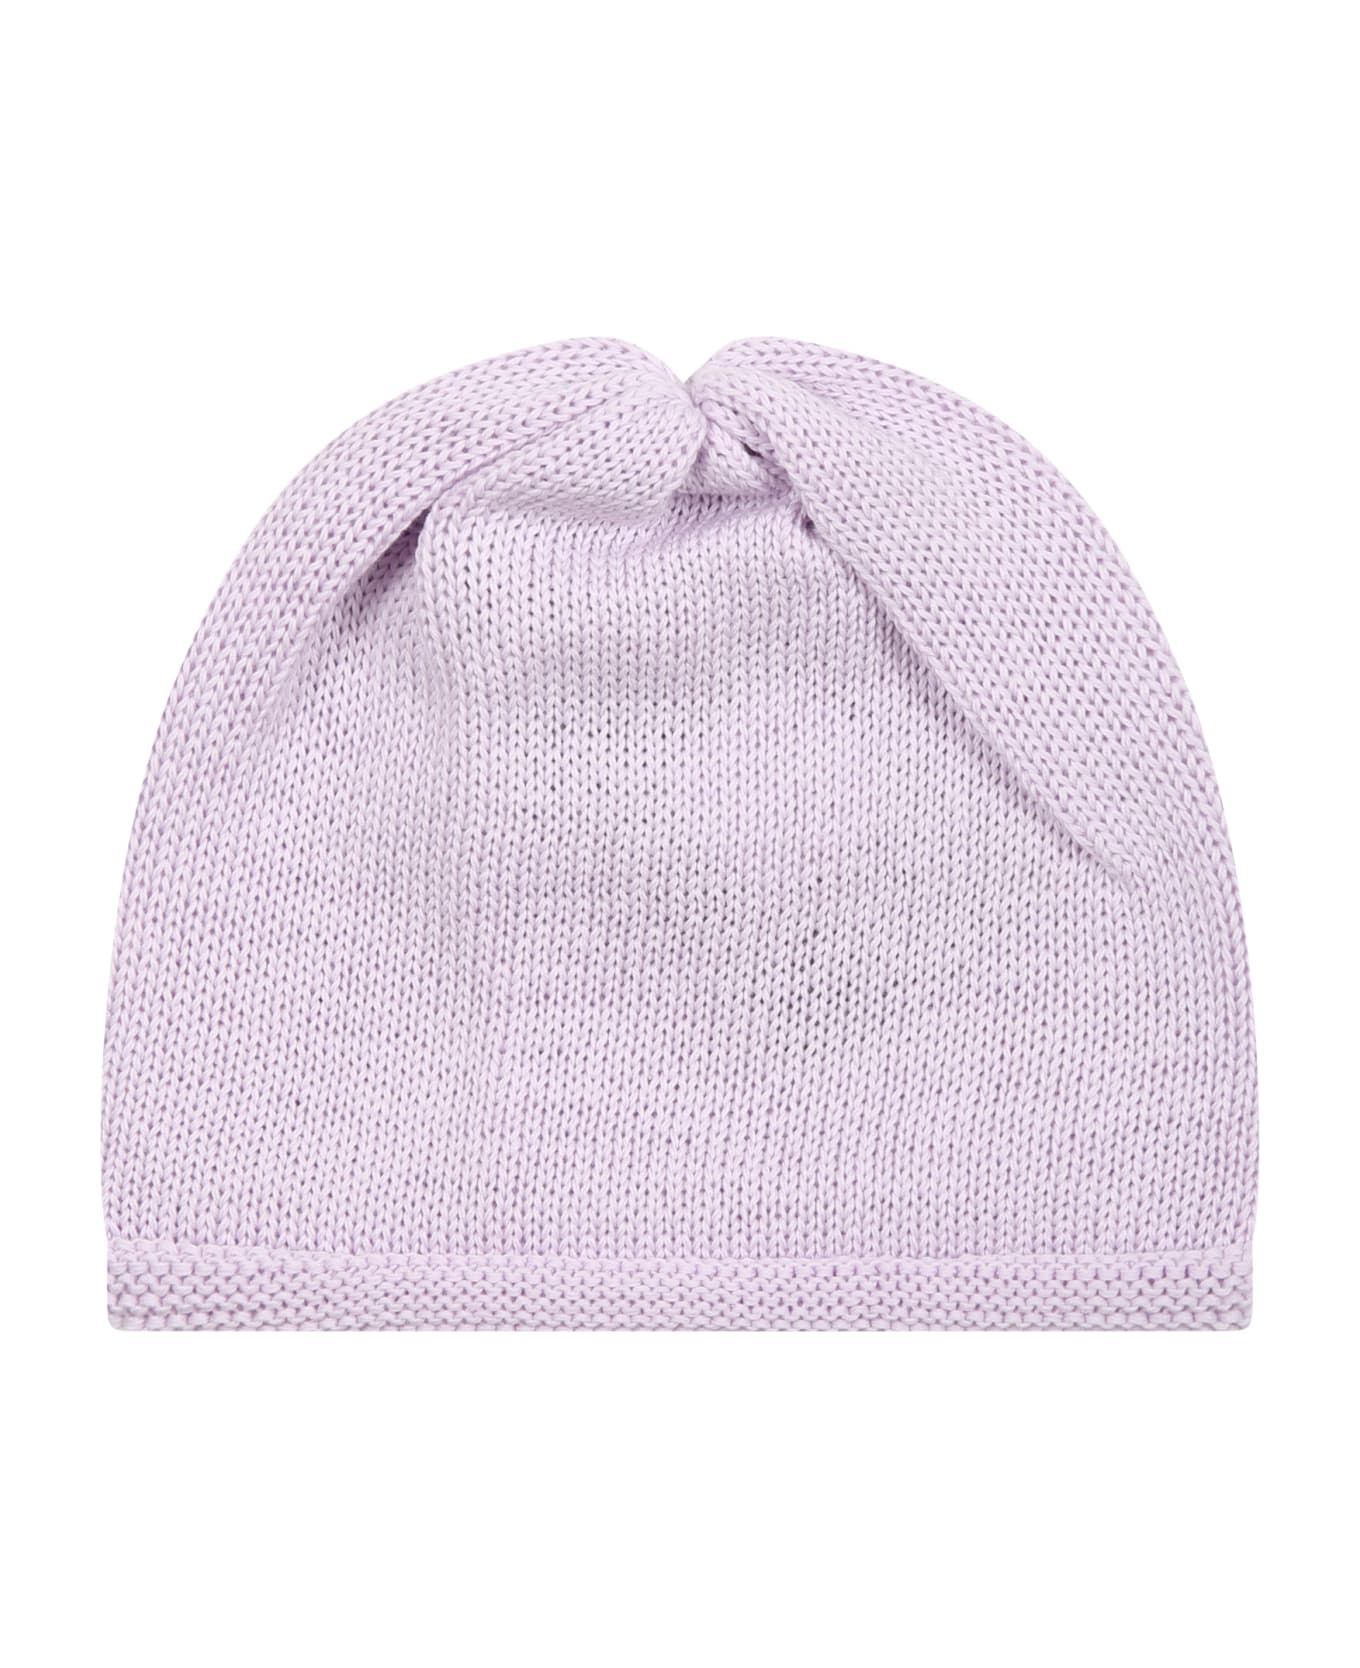 Little Bear Wisteria Hat For Baby Girl - Violet アクセサリー＆ギフト